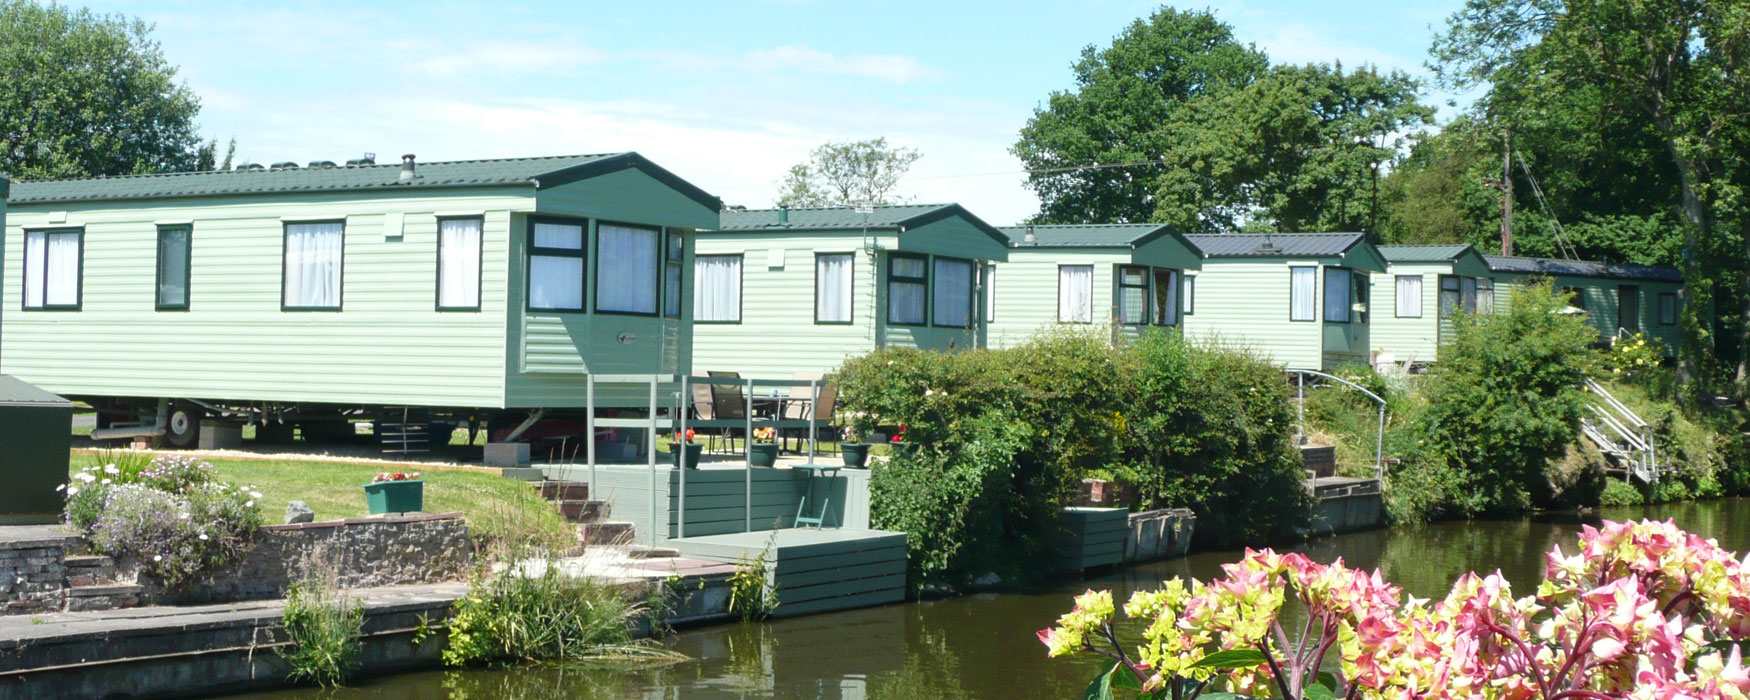 Mobile holiday homes adjacent to the canal